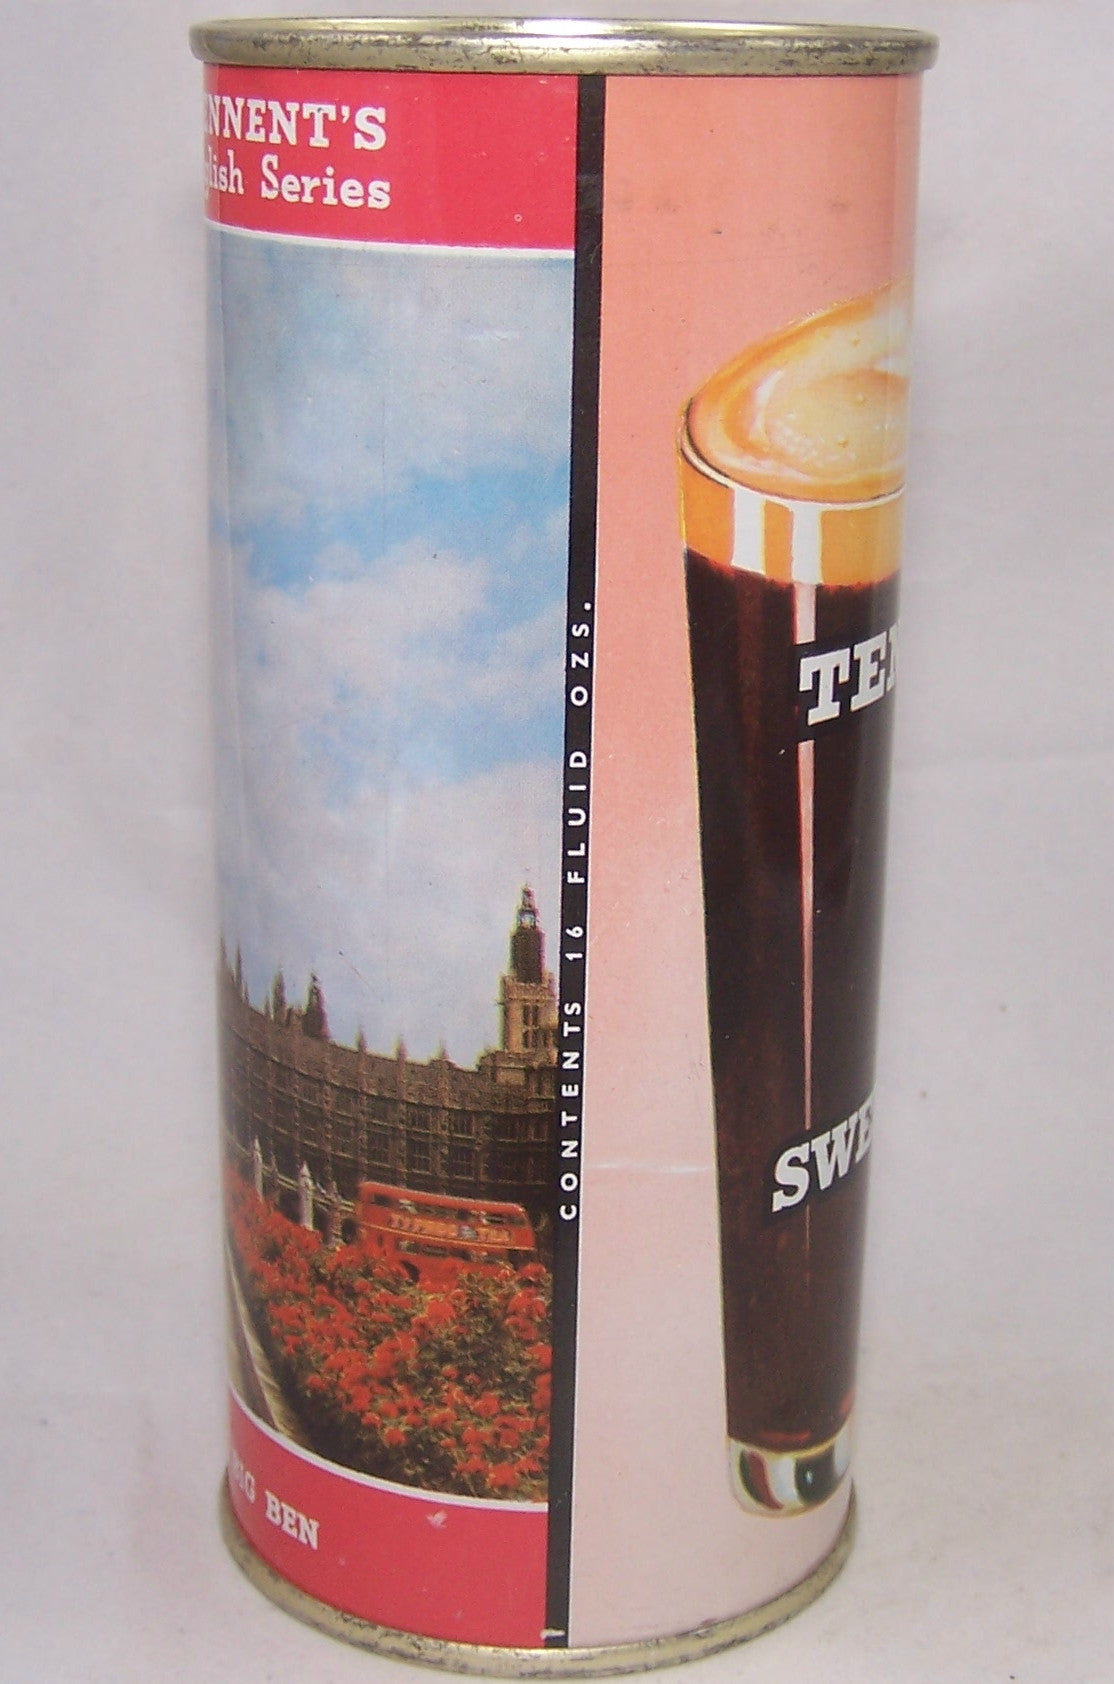 Tennent's Sweet Stout, English Series ( Big Ben), Grade A1+ Sold on 12/19/16